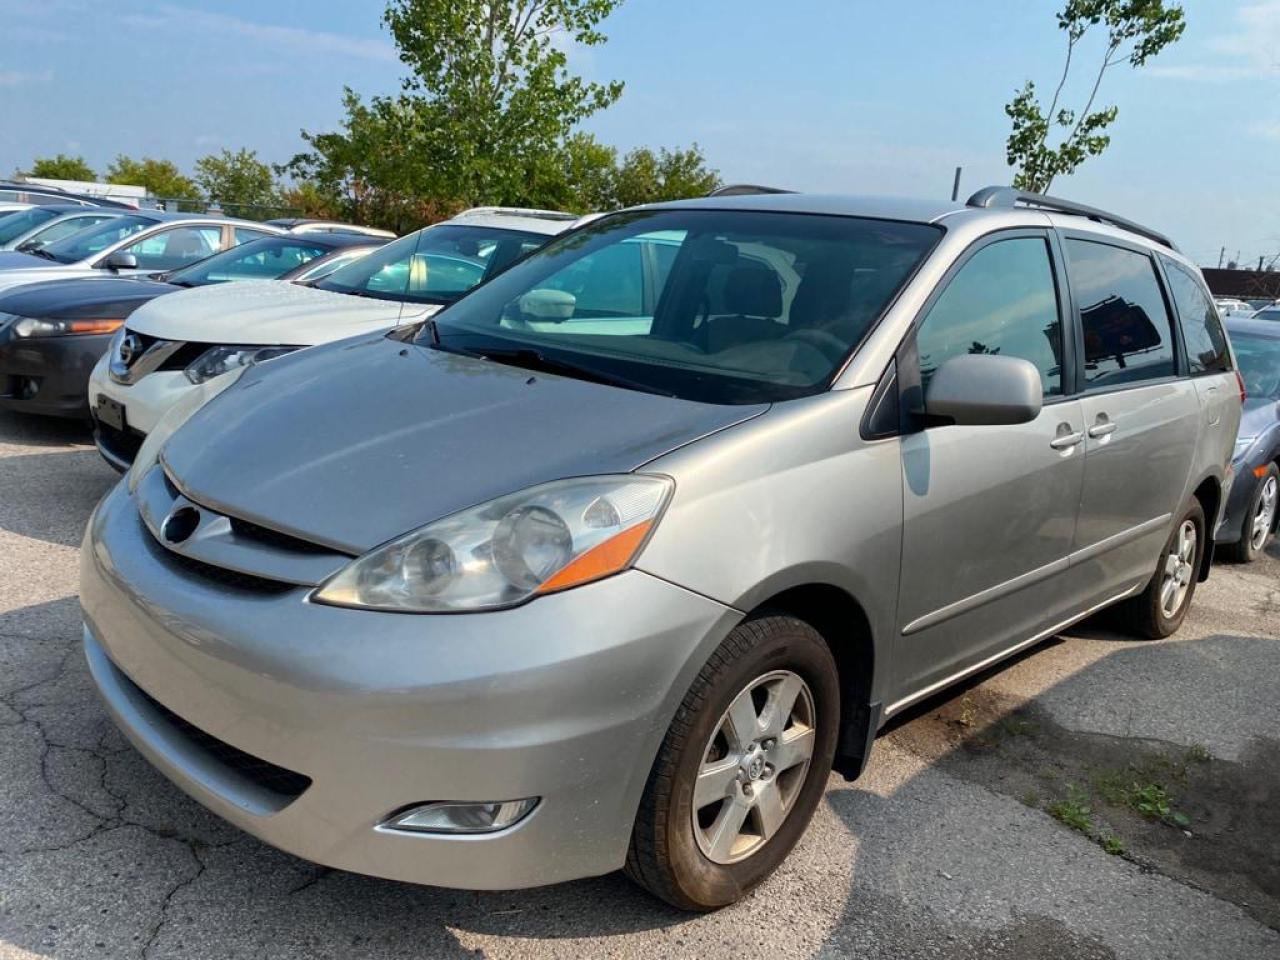 Used 2008 Toyota Sienna for Sale in Scarborough, Ontario | Carpages.ca